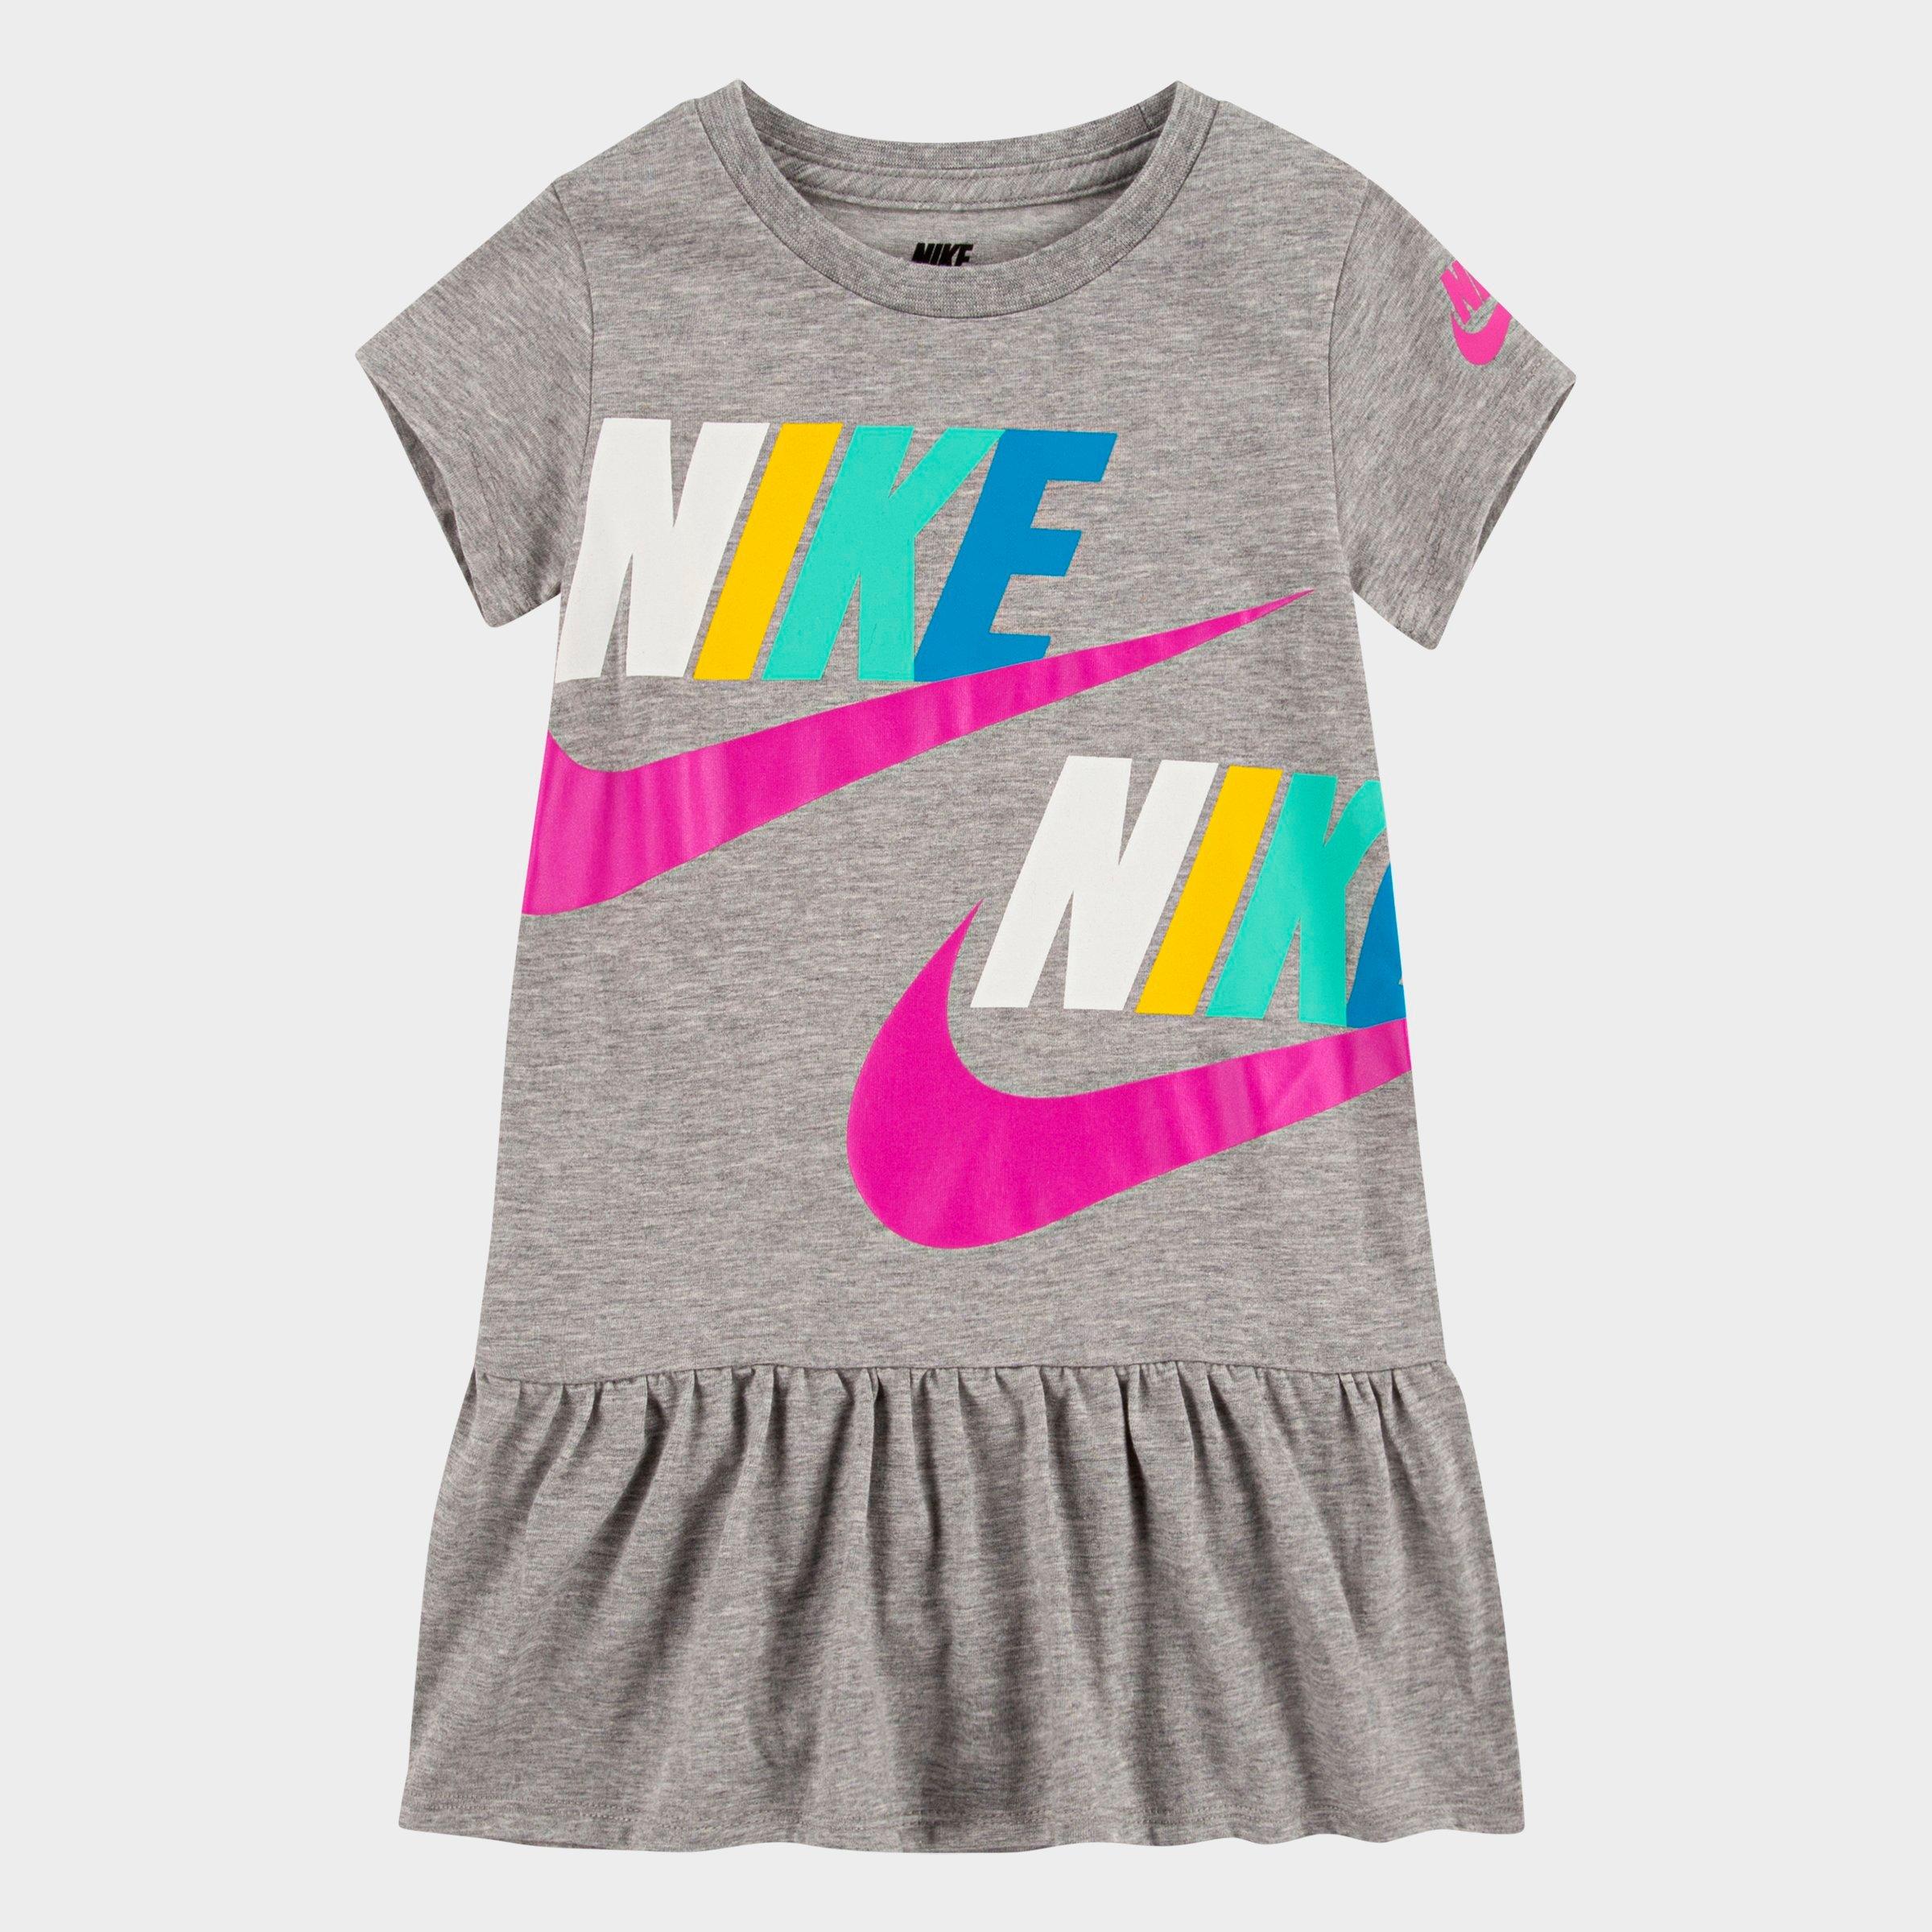 2t nike outfits girl